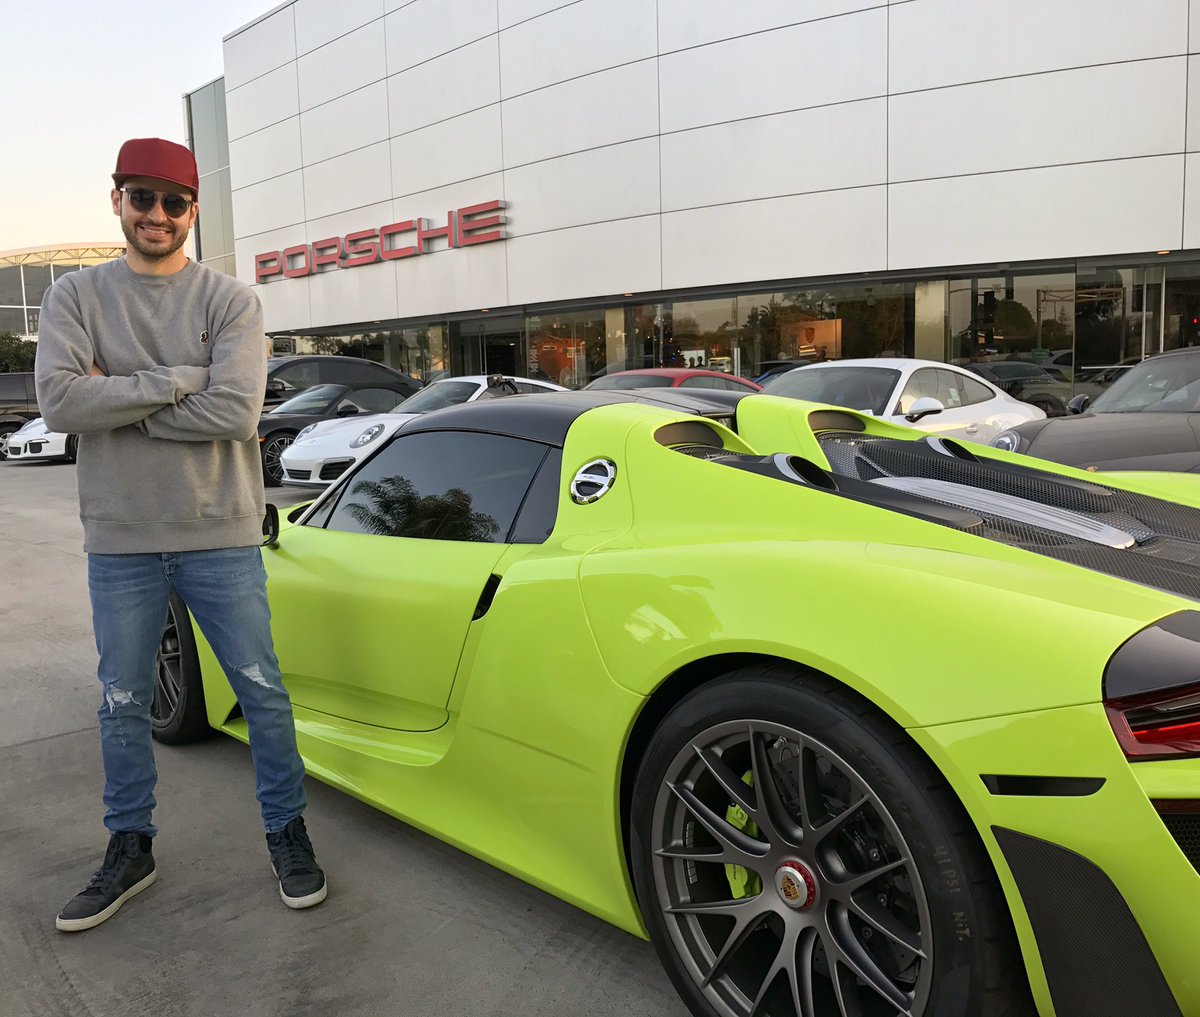 Mr420.sol on Twitter: "Sold my favorite car I've ever owned... all I ask is  that the new owner doesn't call it: "The Donatello" :p  //t.co/o3ghtBFGCH" / Twitter